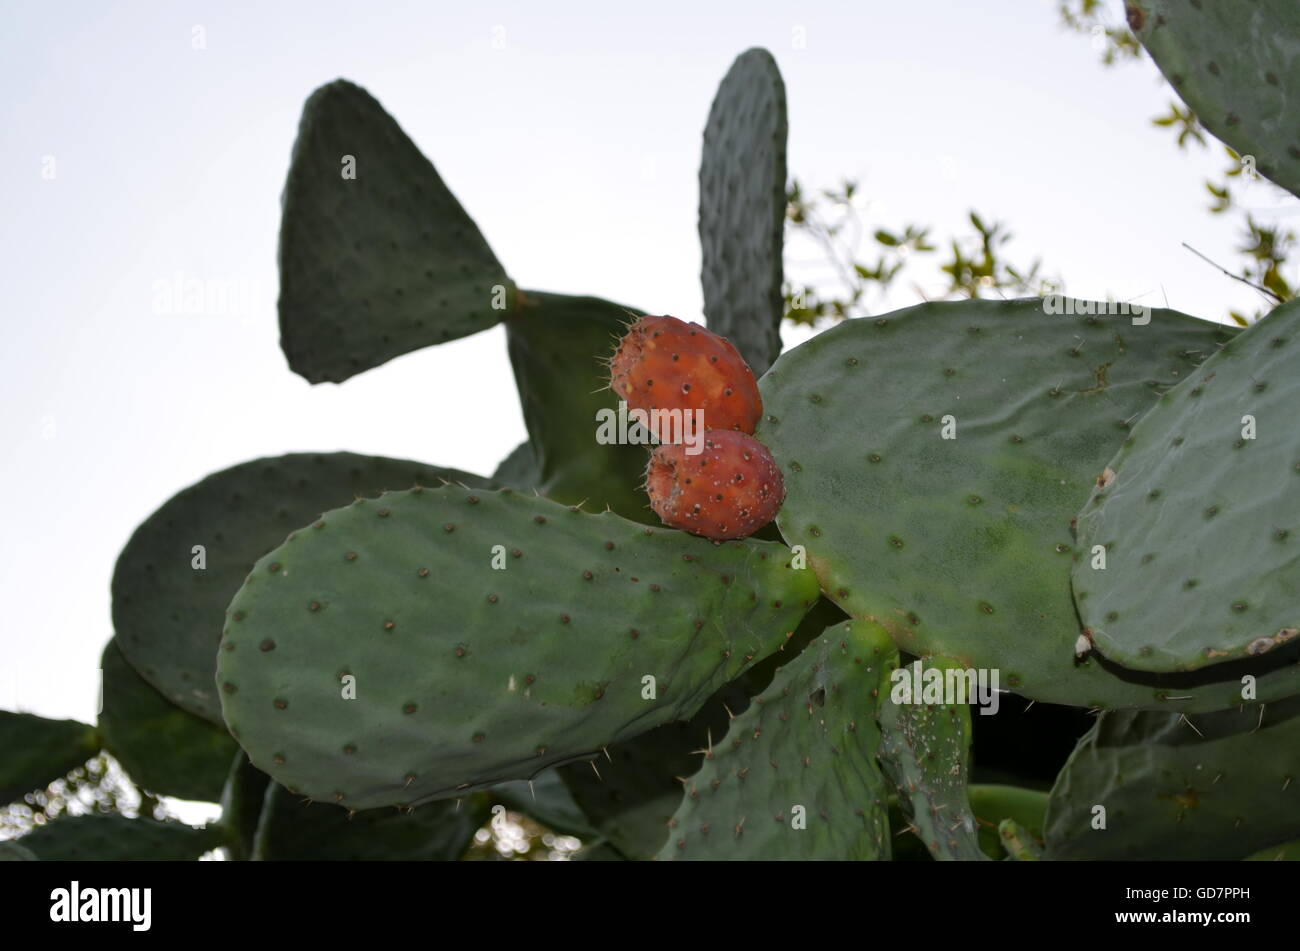 Opuntia (prickly pear) with ripe fruits on clear sky background Stock Photo